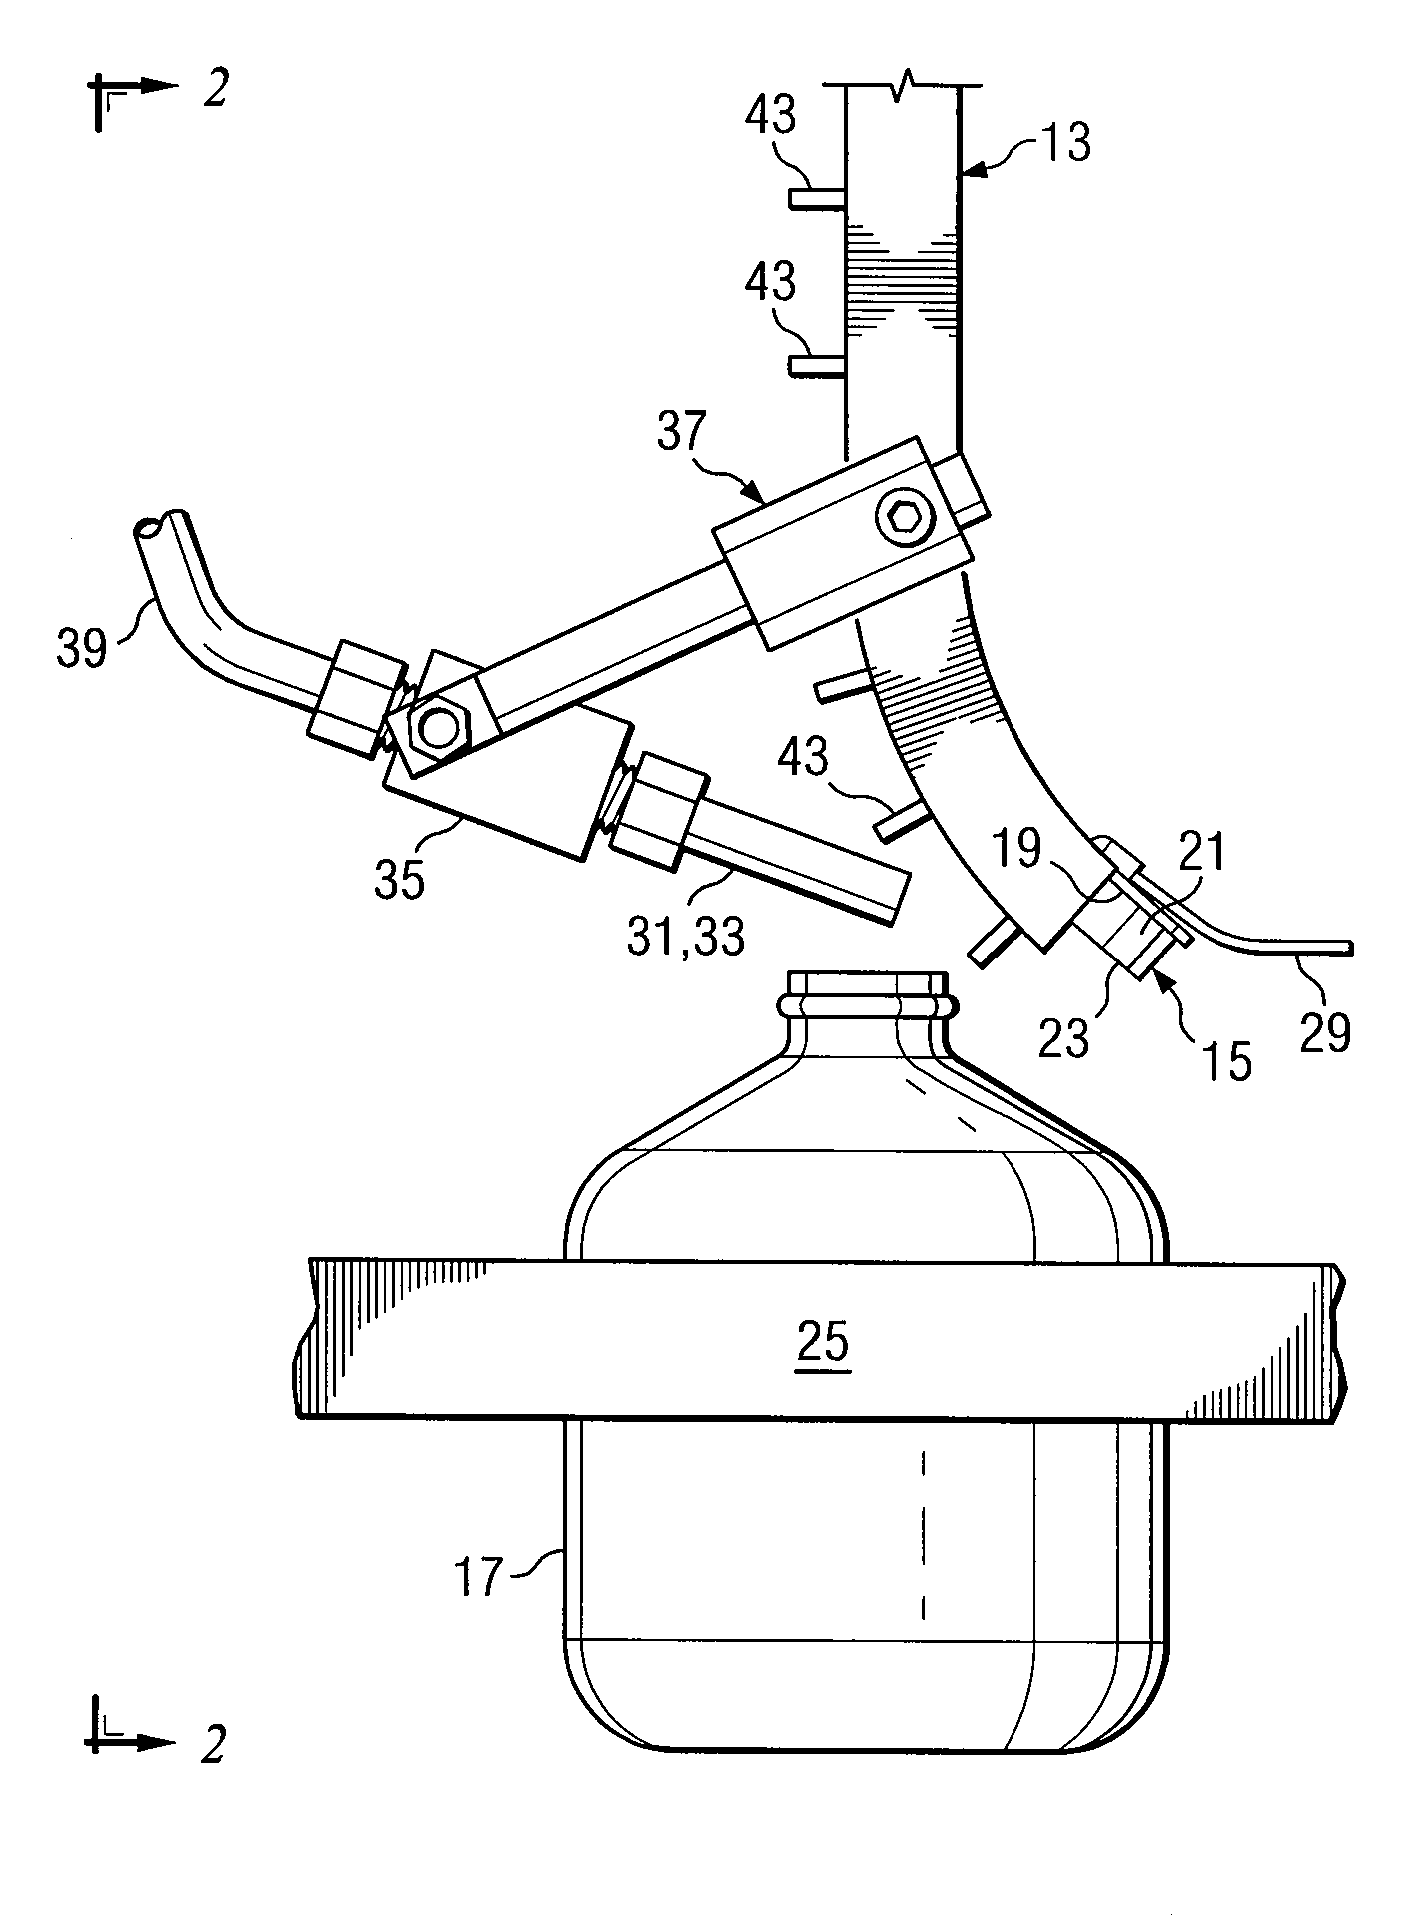 Method and Apparatus for Flushing a Container with an Inert Gas